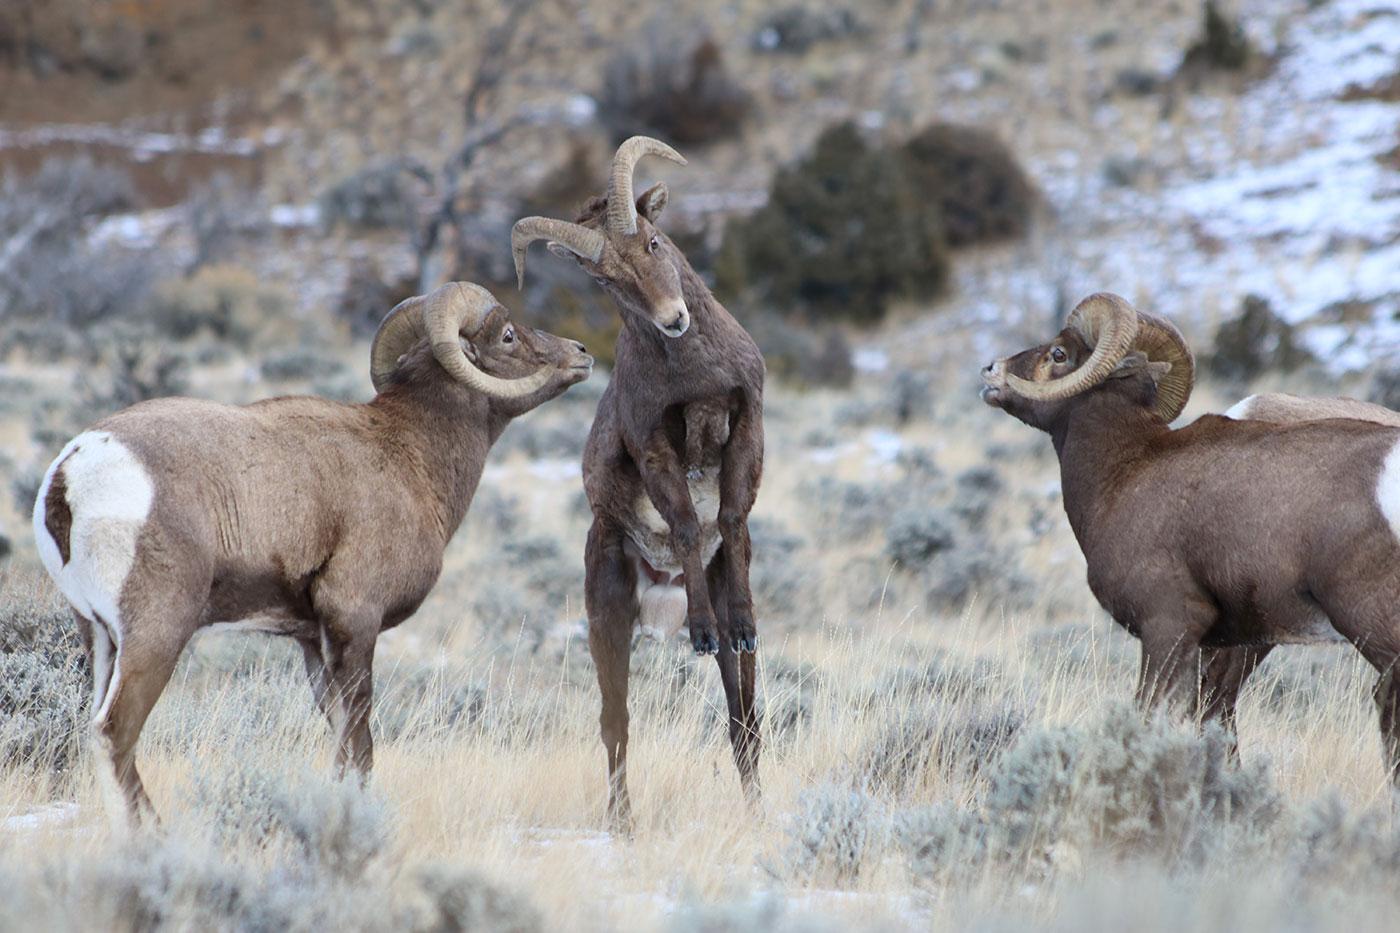 Bighorn Sheep fight over mates in Wyoming. Photo: BBC/Lydia Baines